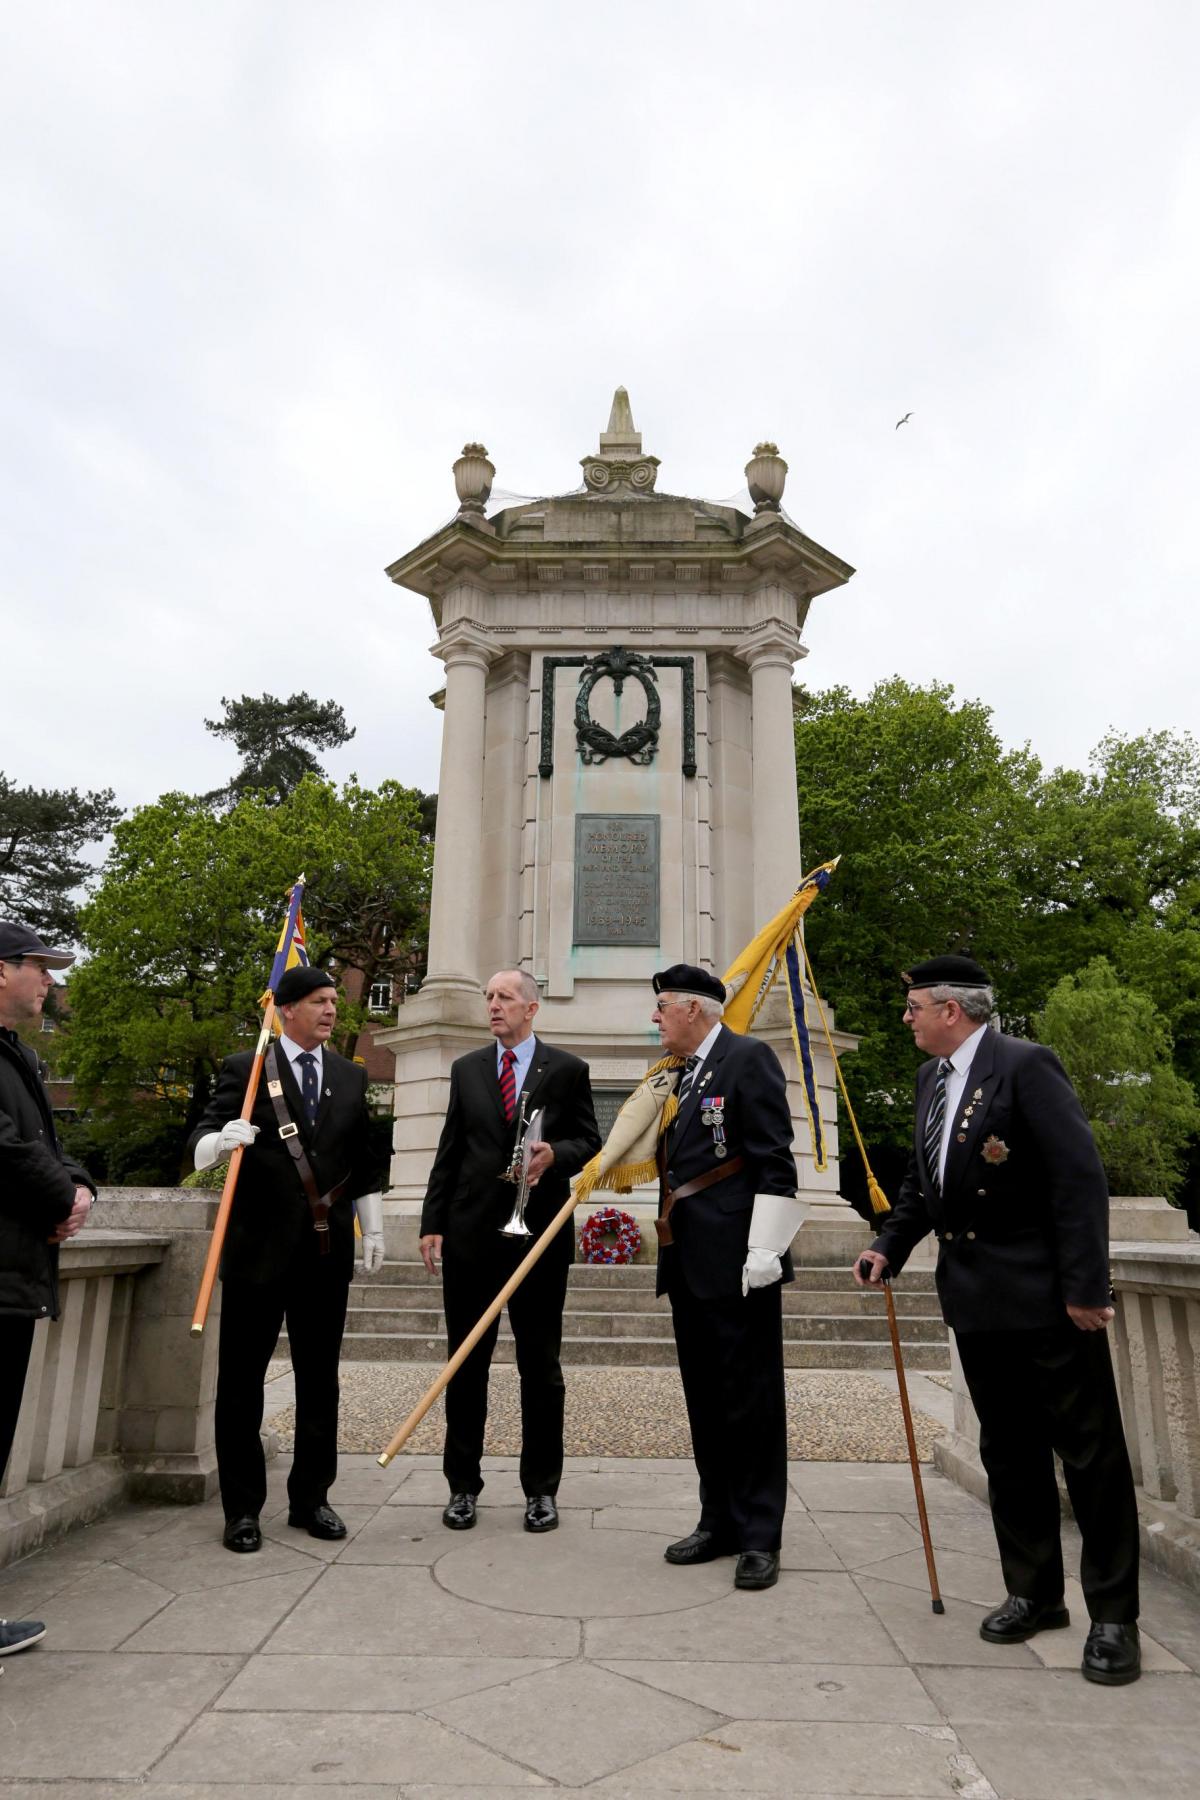 The 70th anniversary of VE Day is marked in Bournemouth